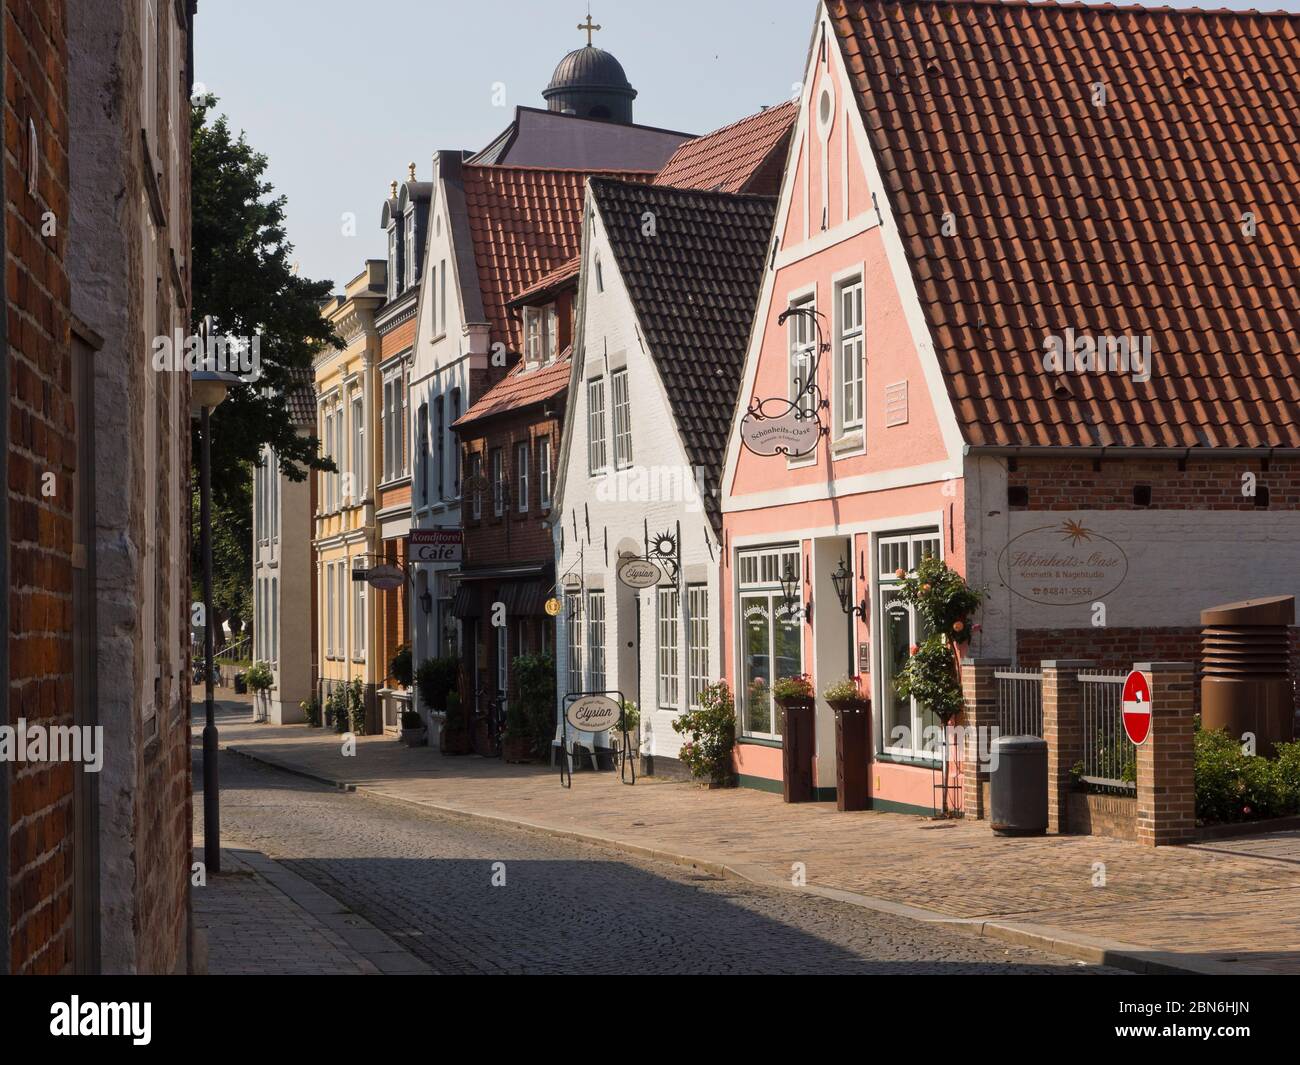 Idyllic narrow street with low houses and shops in the centre of Husum Schleswig-Holstein, Germany ideal for sightseeing on foot or by bike Stock Photo